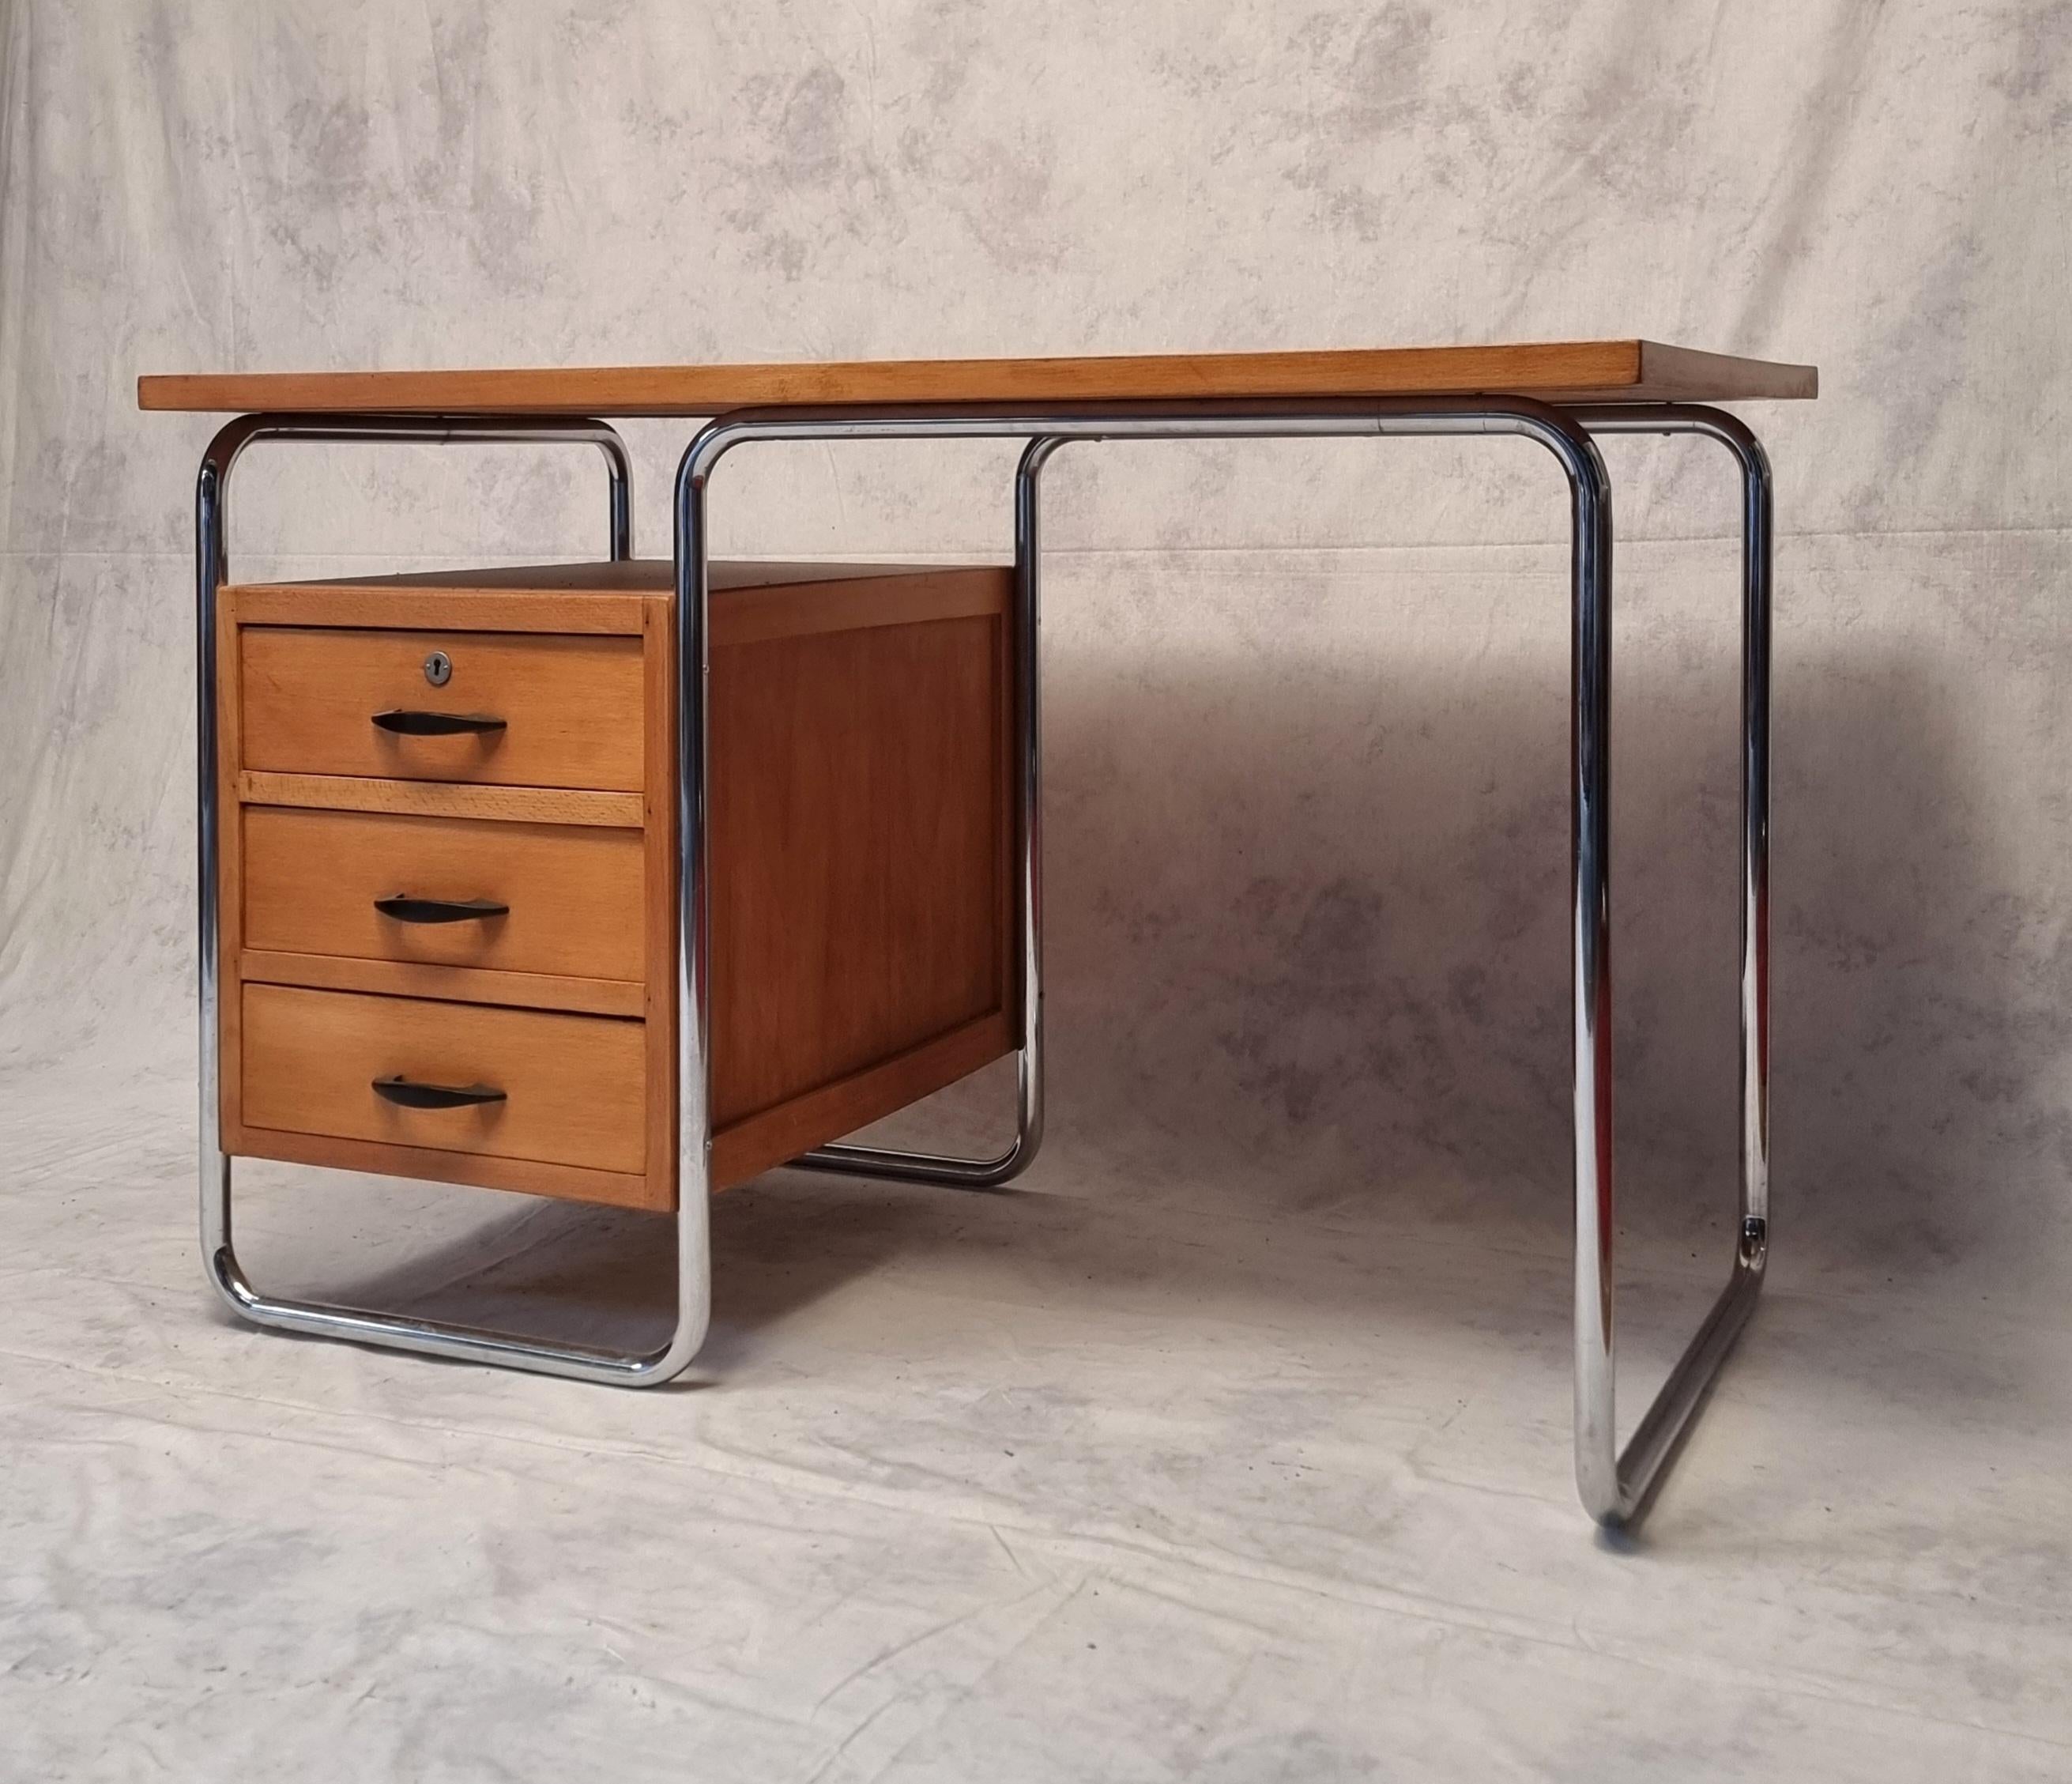 Office of Czech designer Rudolf Vichr from the Bauhaus period produced by Vichr & Co.
The Bauhaus movement was born following the Great War in 1919 and brings together multiple disciplines including architecture, design and art as a whole. It was